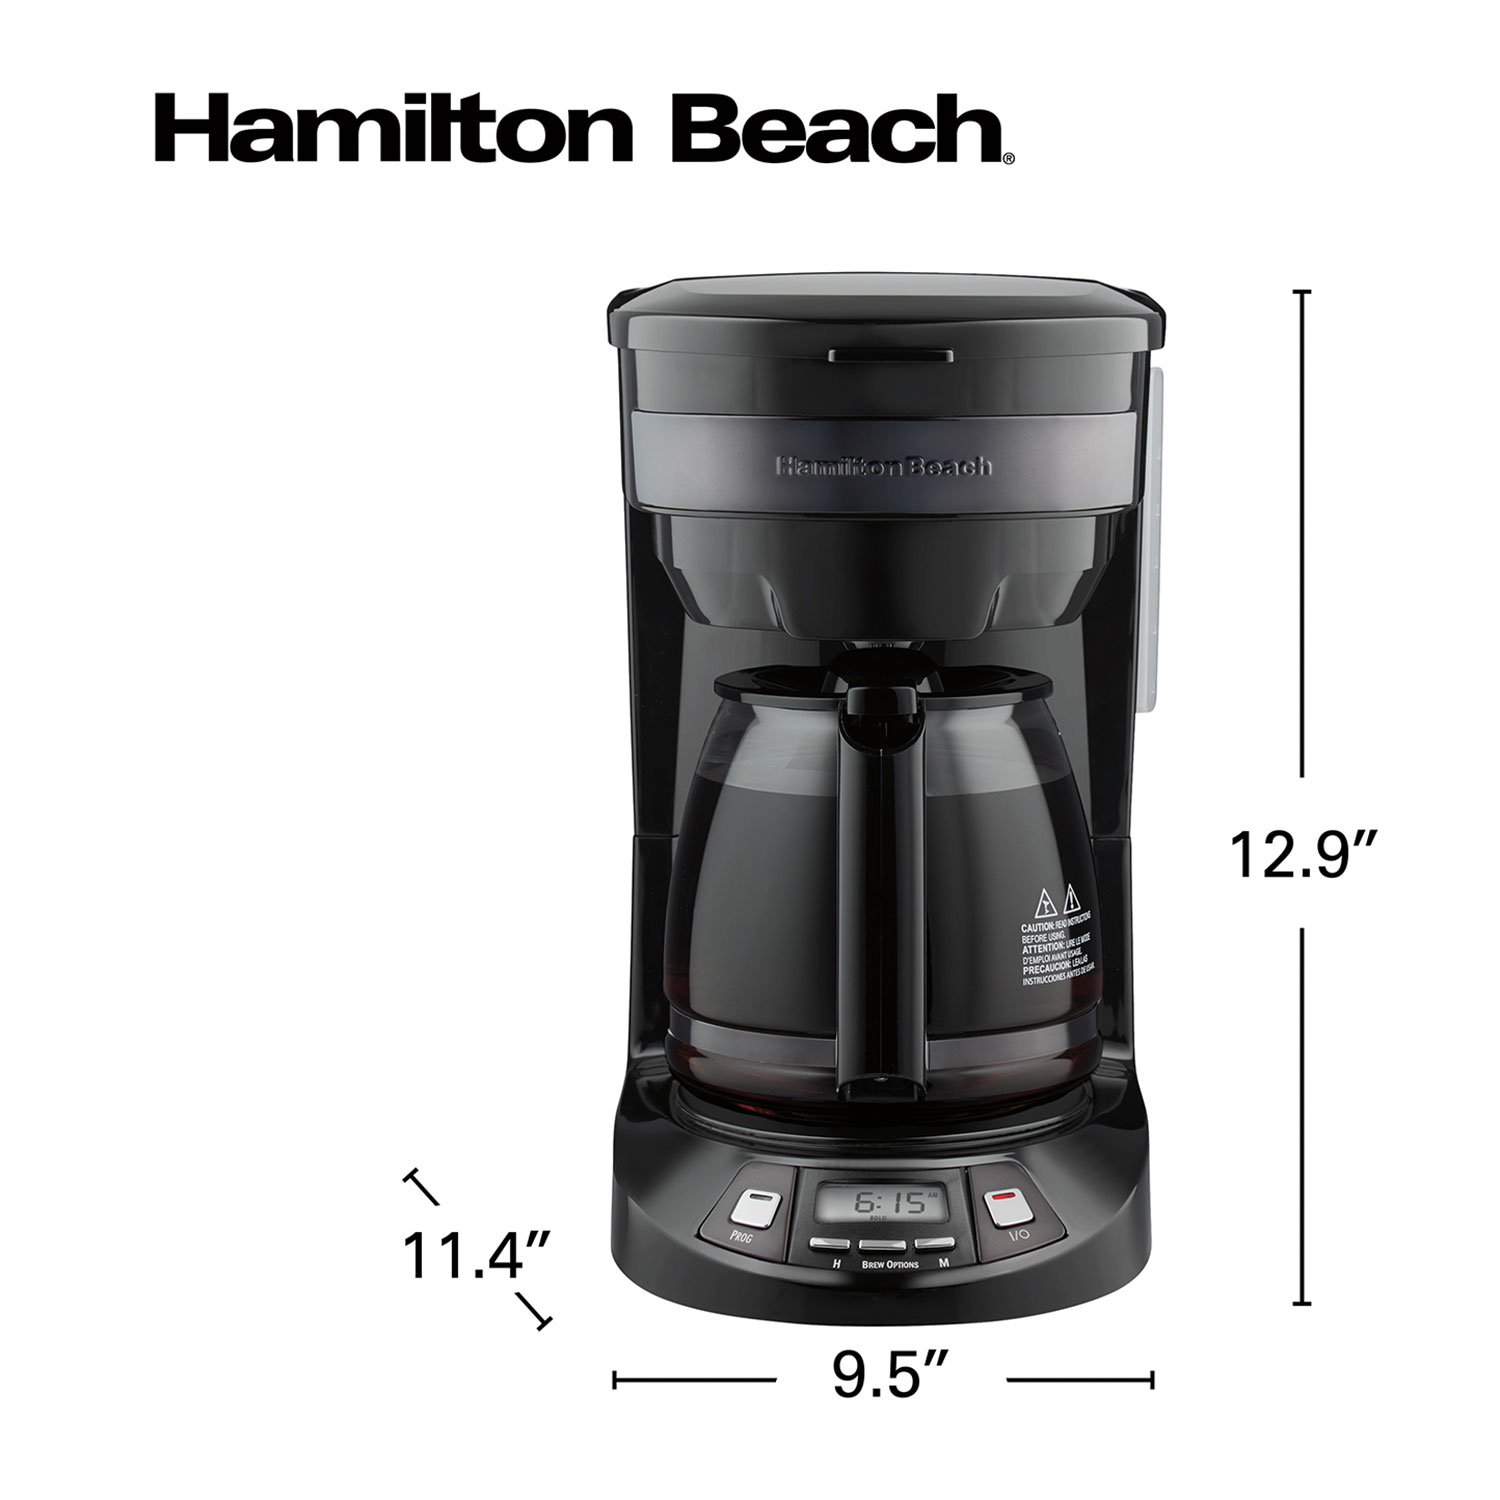 12-Cup Programmable Coffee Maker (Black & Stainless), Hamilton Beach